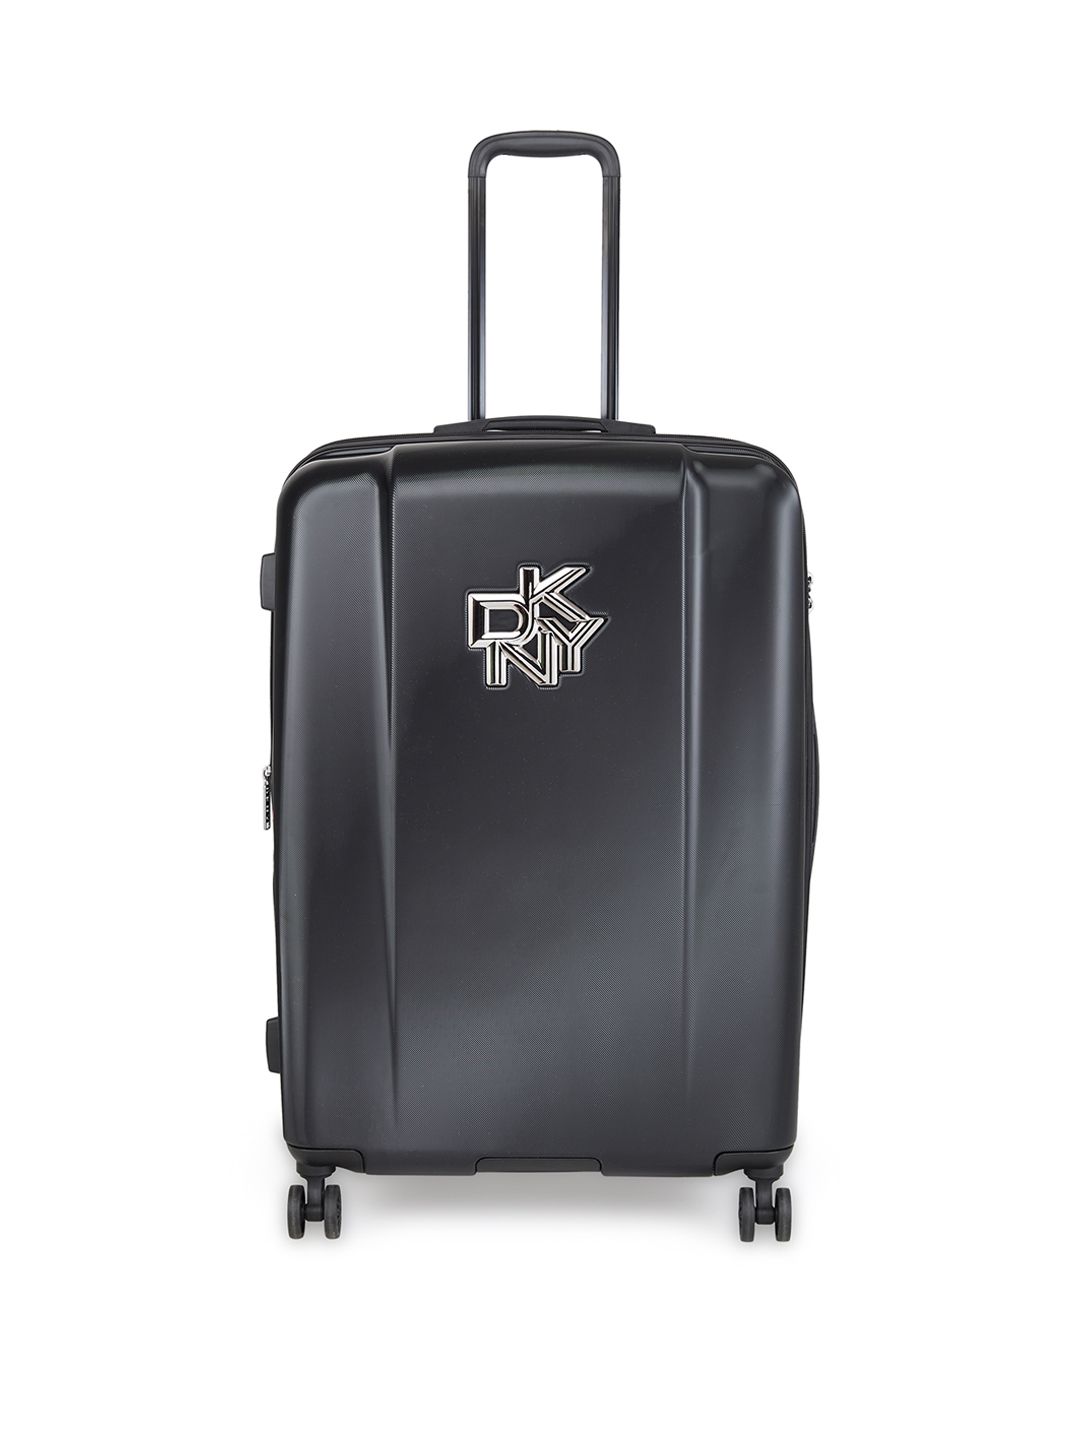 DKNY ALIAS Black Large Size Trolley Bag Price in India